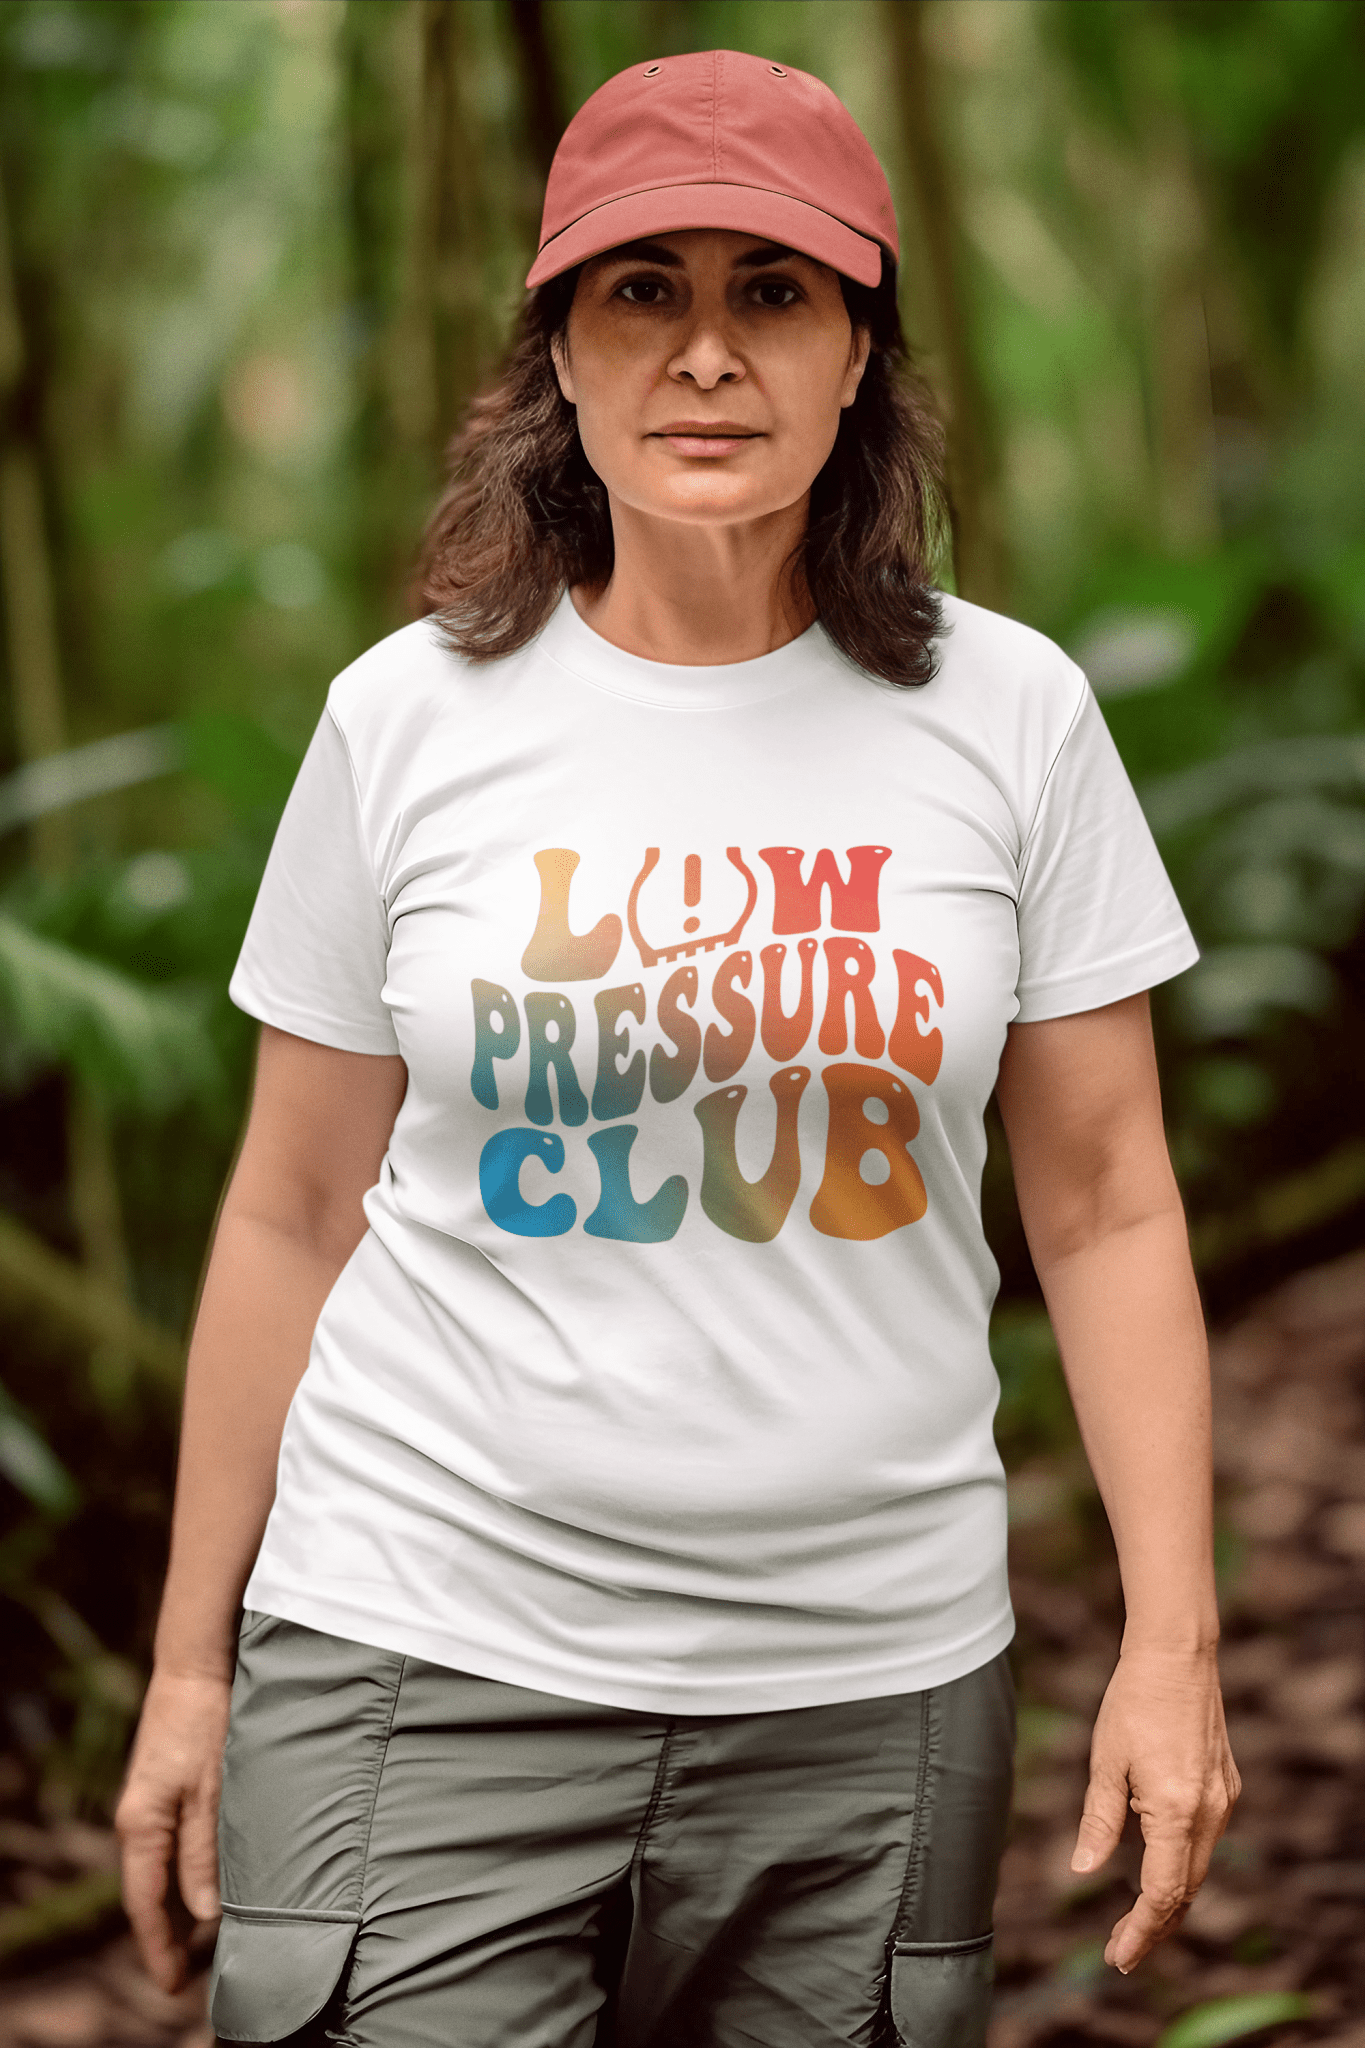 Low Pressure Club Women's Fit Tee - Goats Trail Off-Road Apparel Company